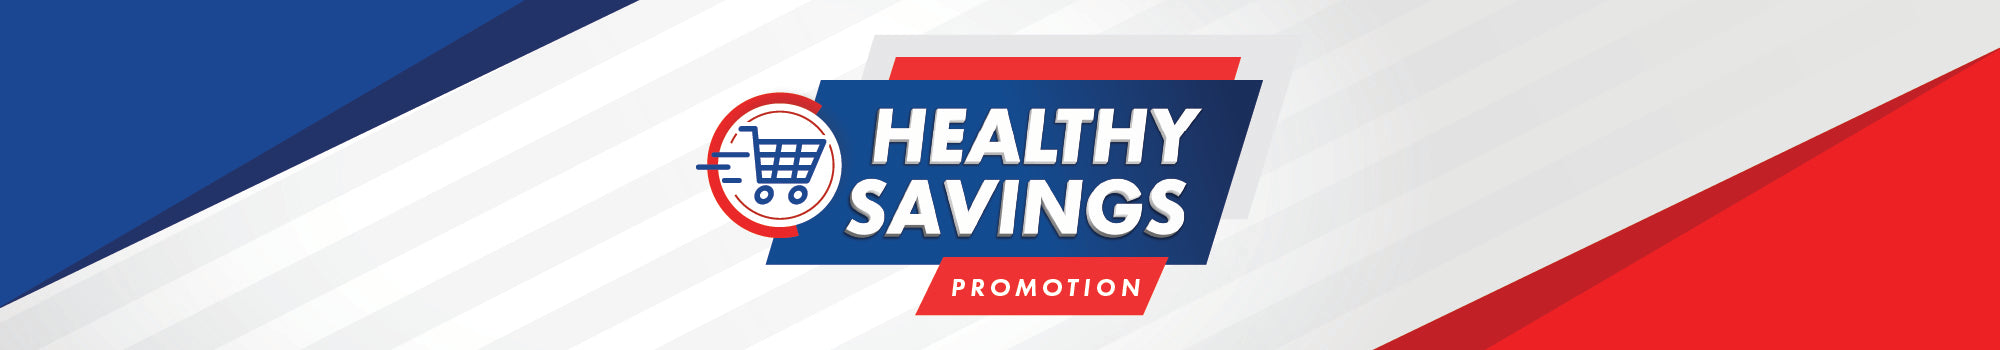 Healthy Savings Promotion